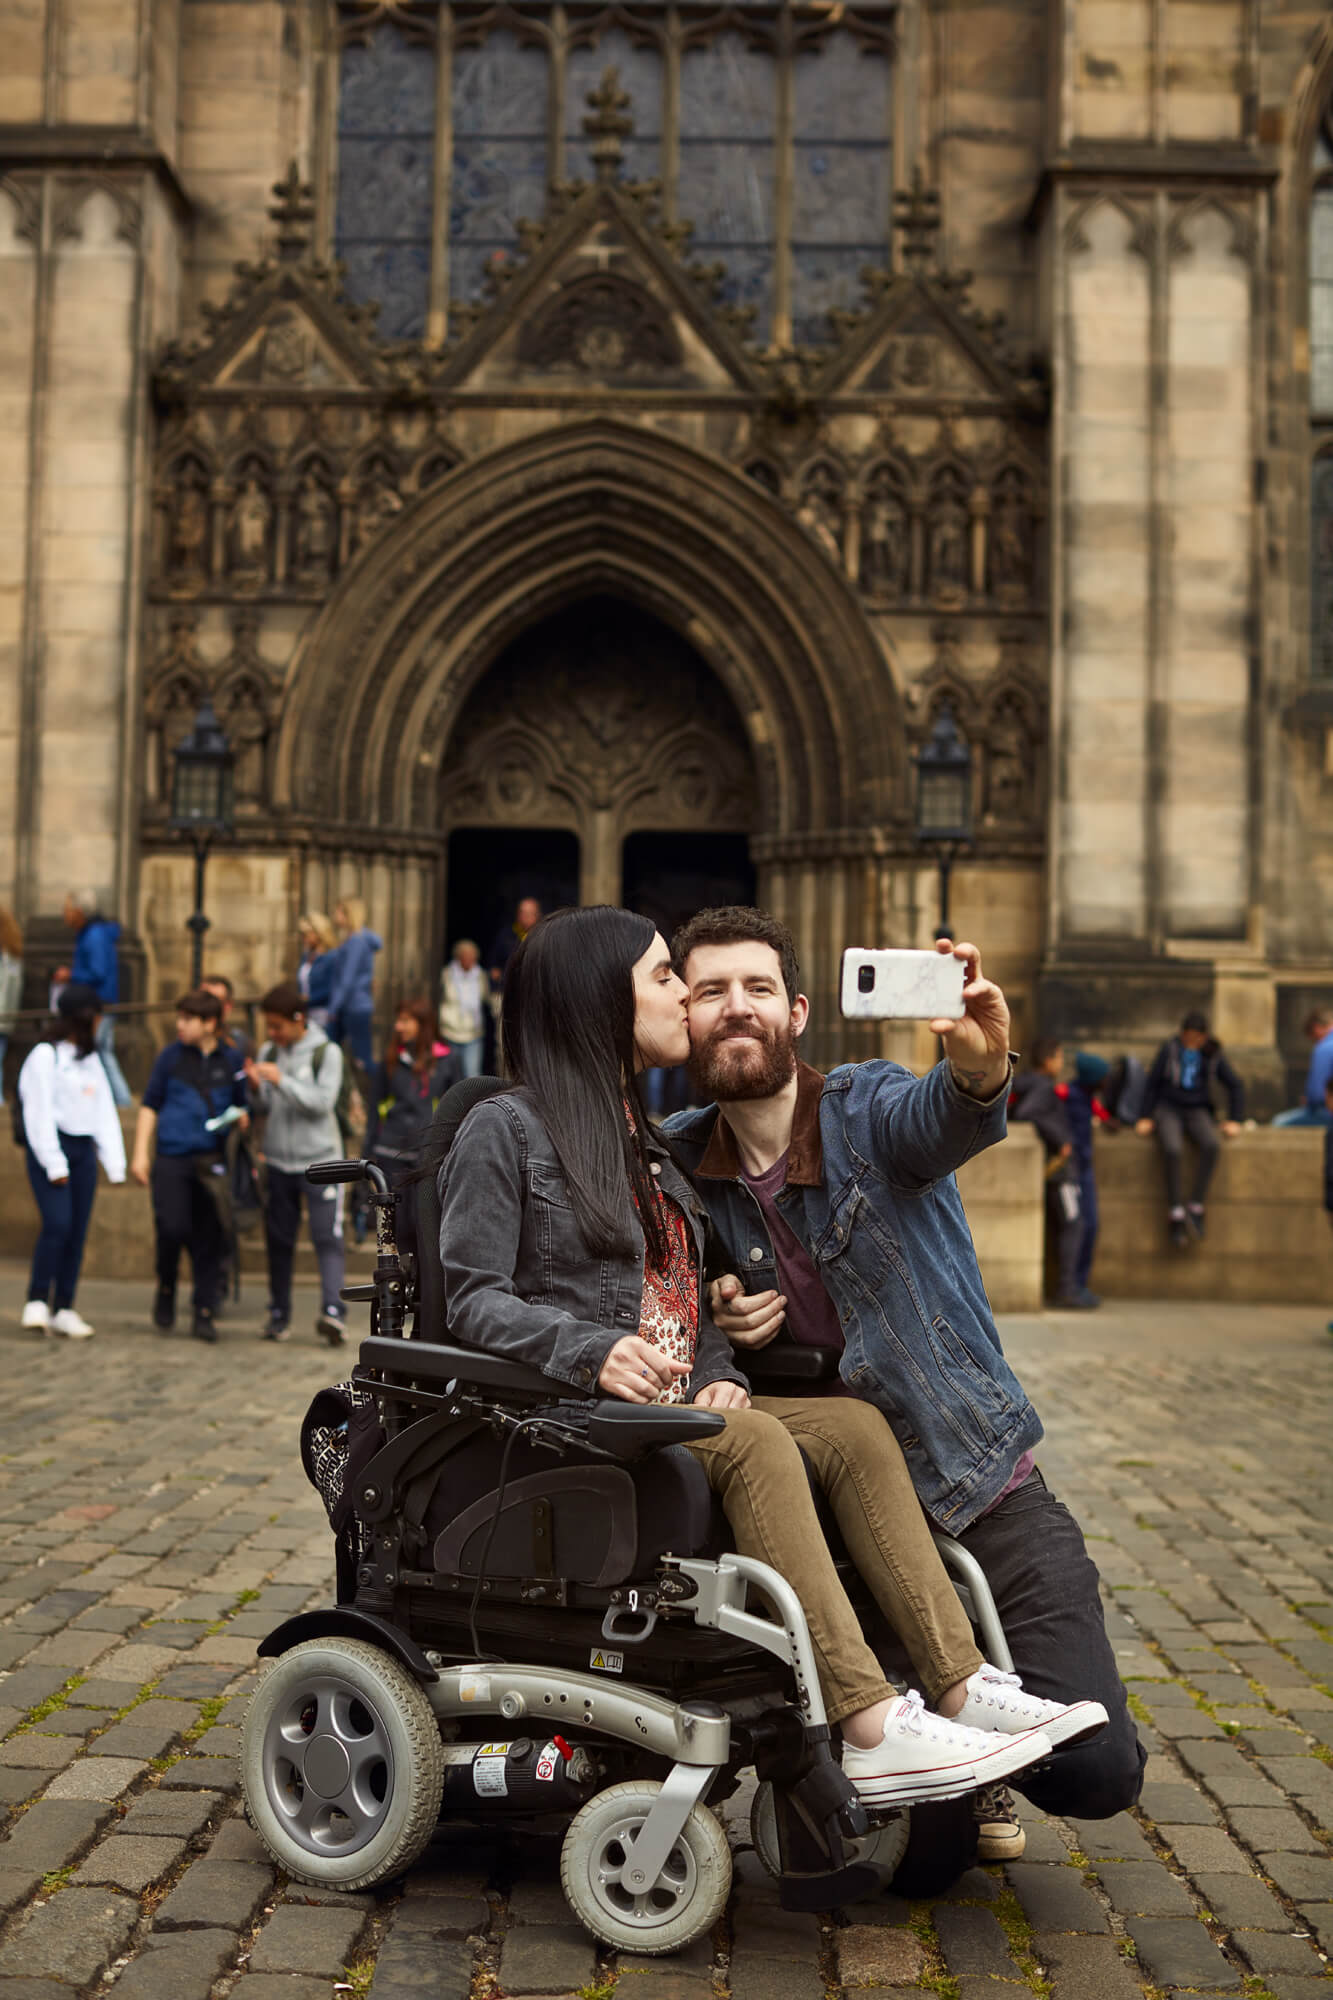 Emma in her powered wheelchair with her boyfriend kneeling beside her holding a phone up while taking a selfie of them together. Emma is giving him a kiss on the cheek. They are outside a Cathedral in Edinburgh.